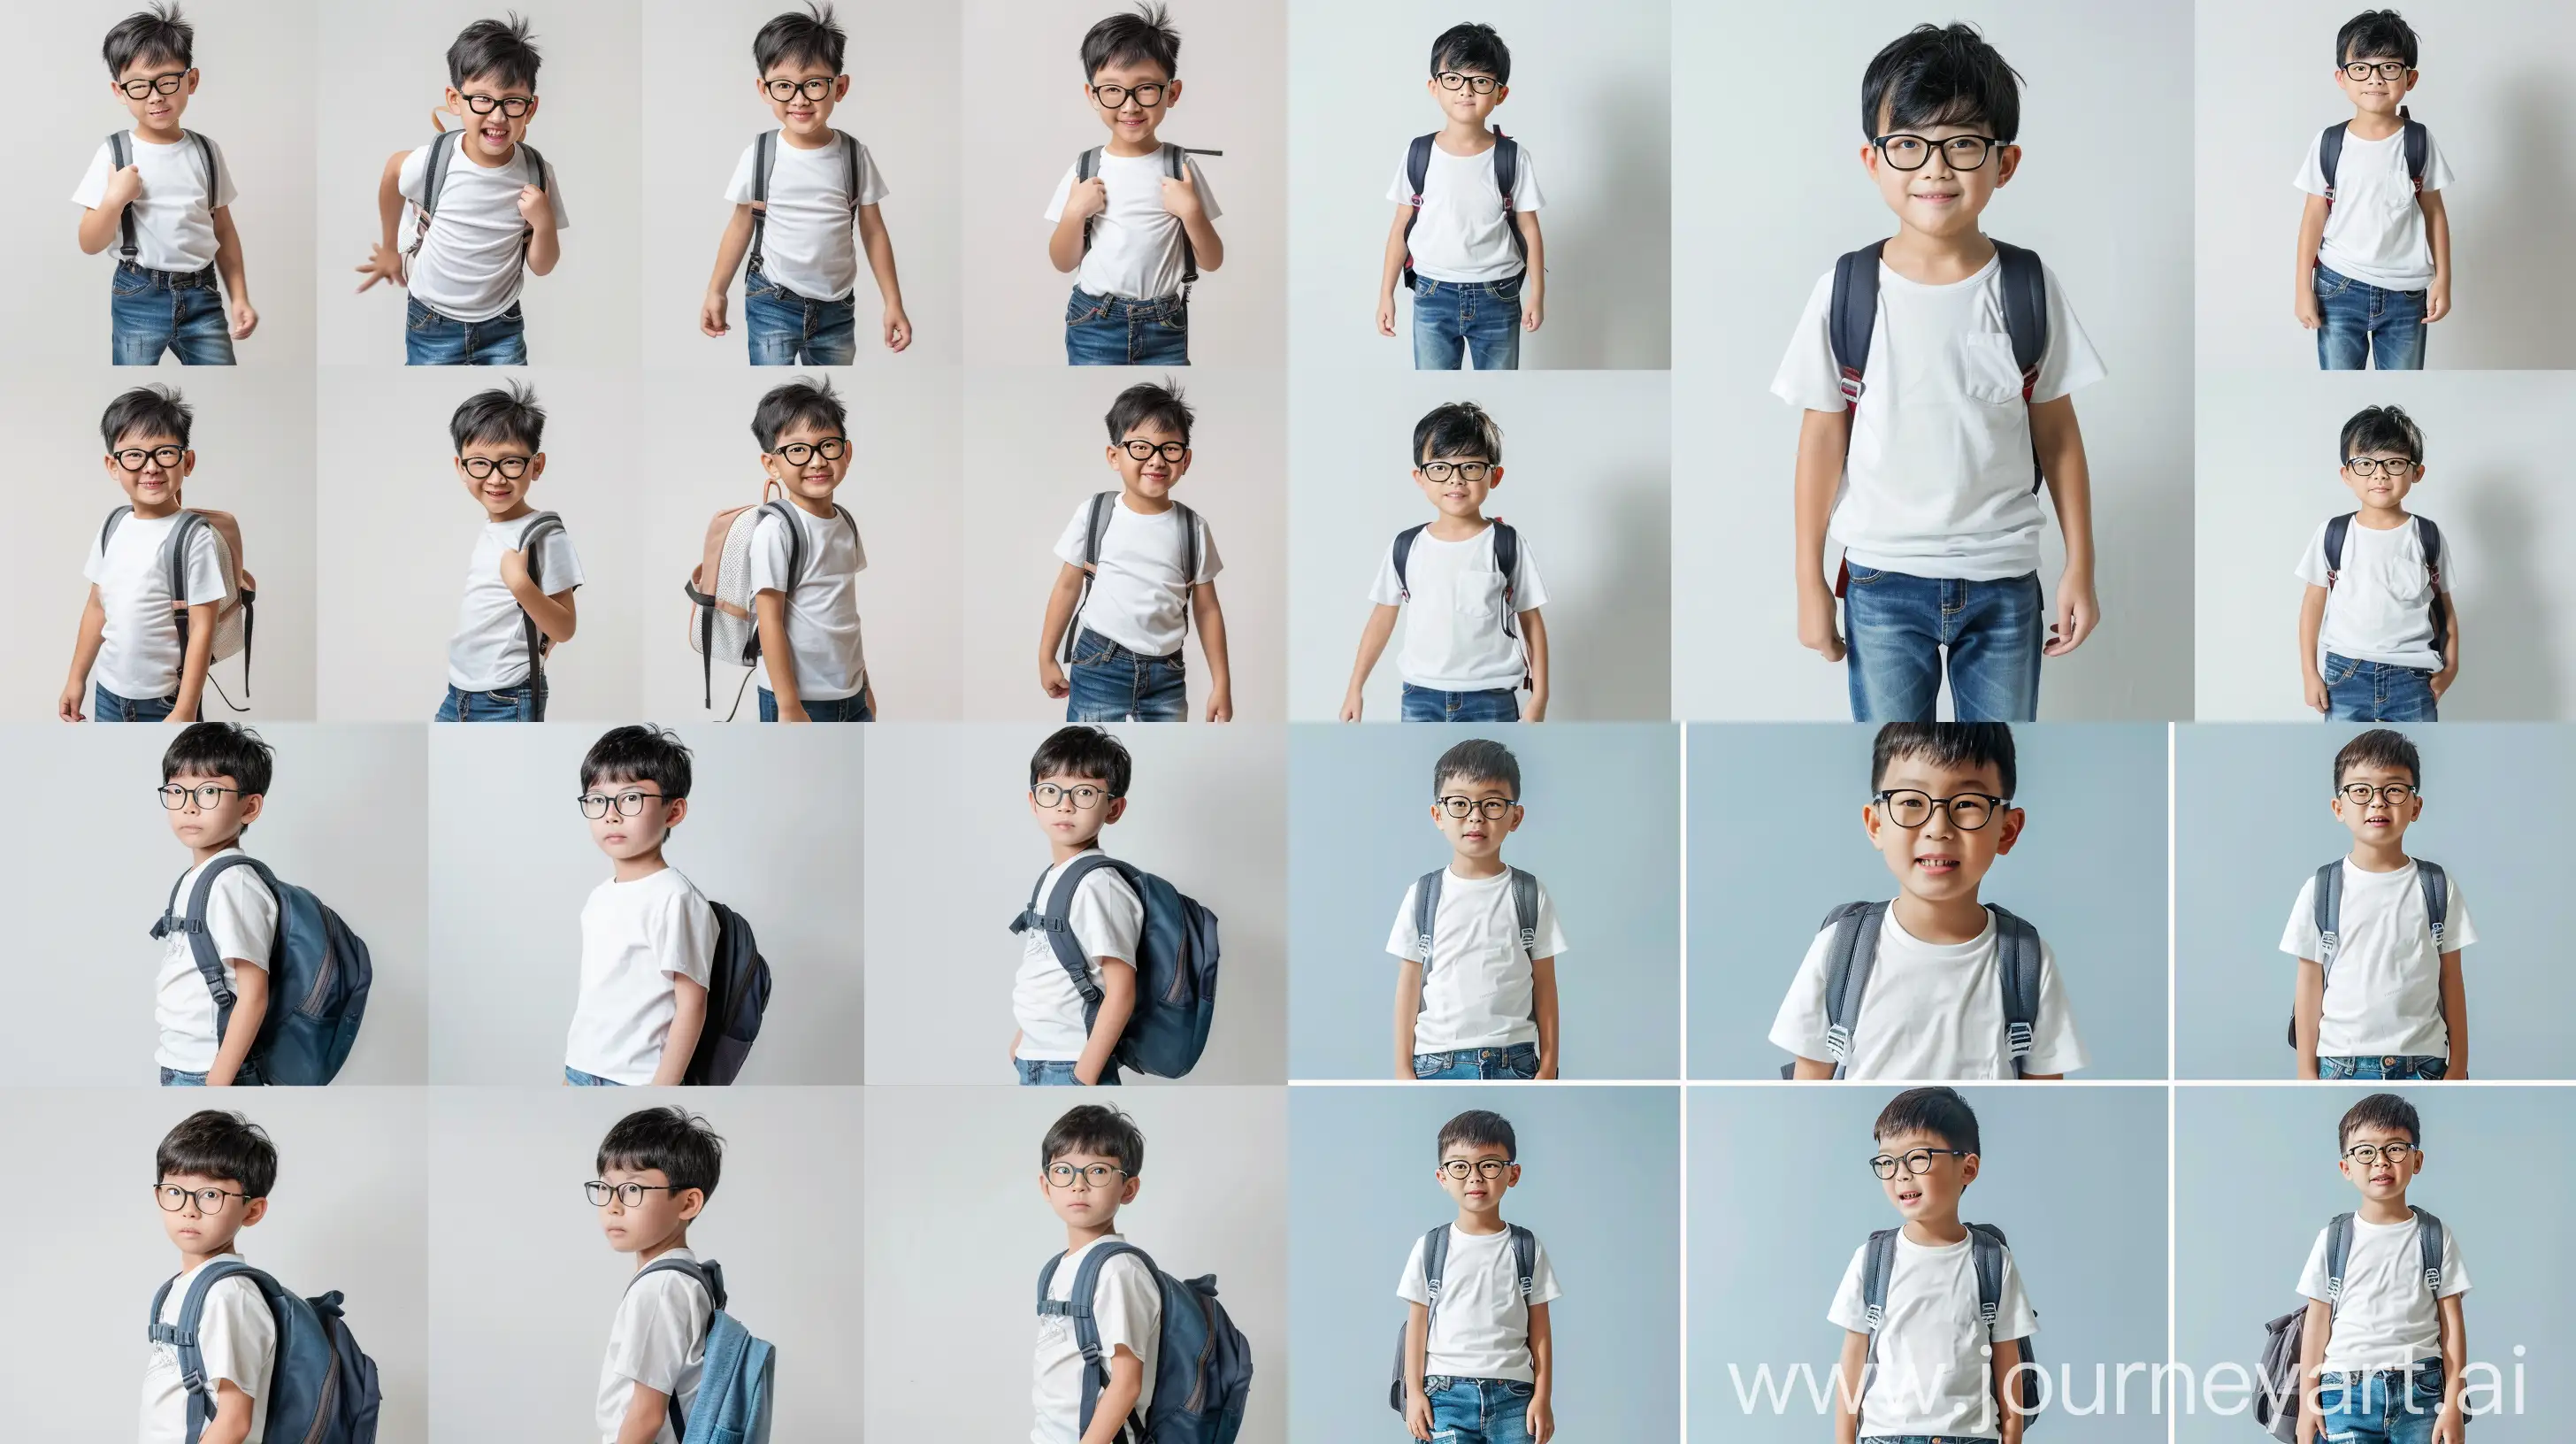 Smart-and-Curious-Korean-Boy-Expresses-Joy-in-Candid-Photo-Collage